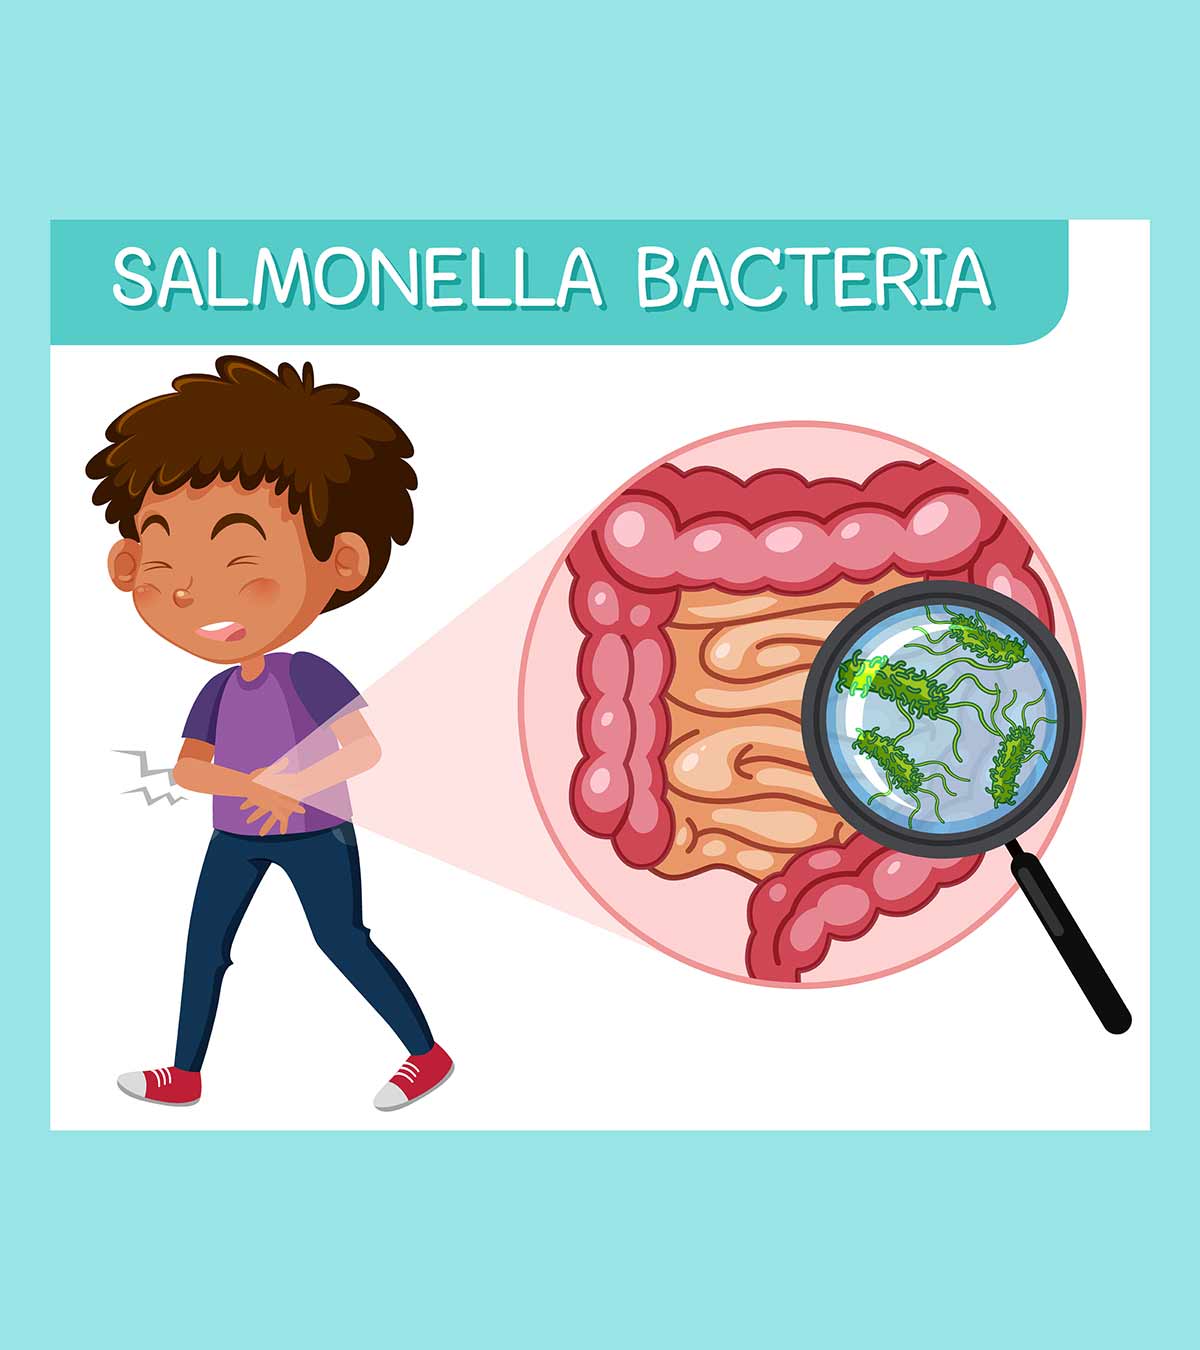 Salmonella Infection In Kids: Signs, Causes, And Treatment